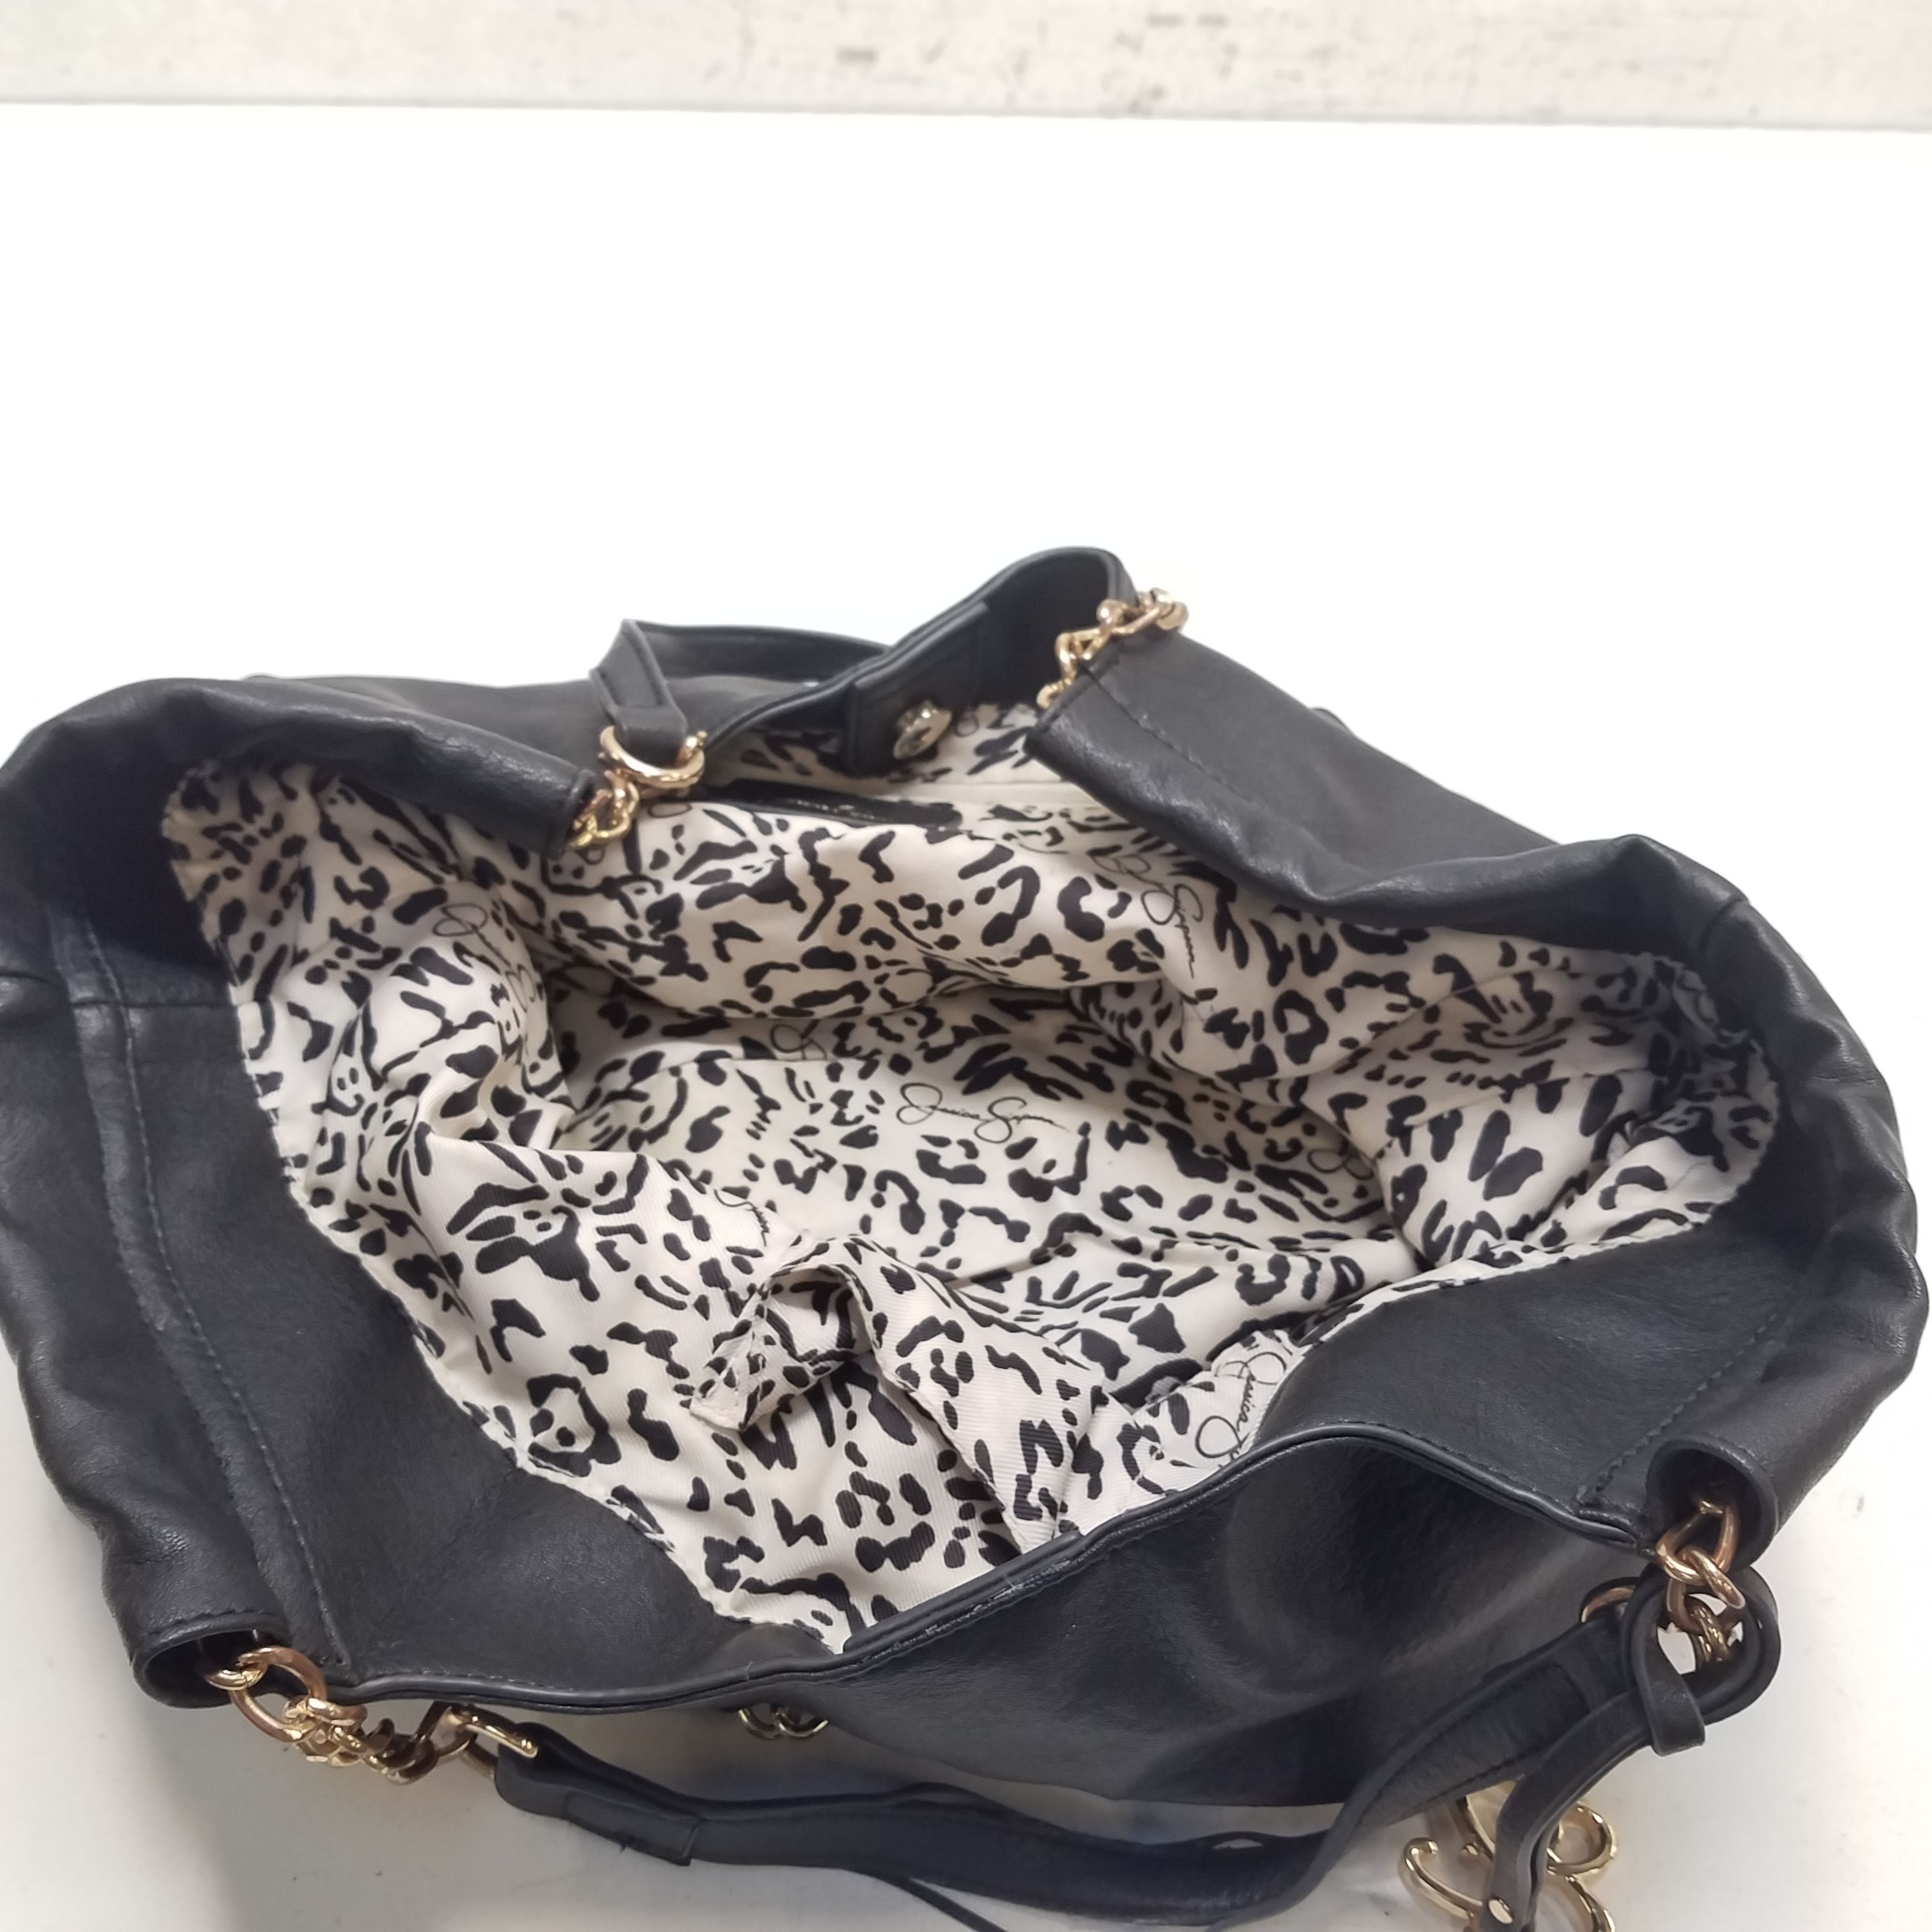 Jessica Simpson Black Gold Tote Bag with 6 Pockets